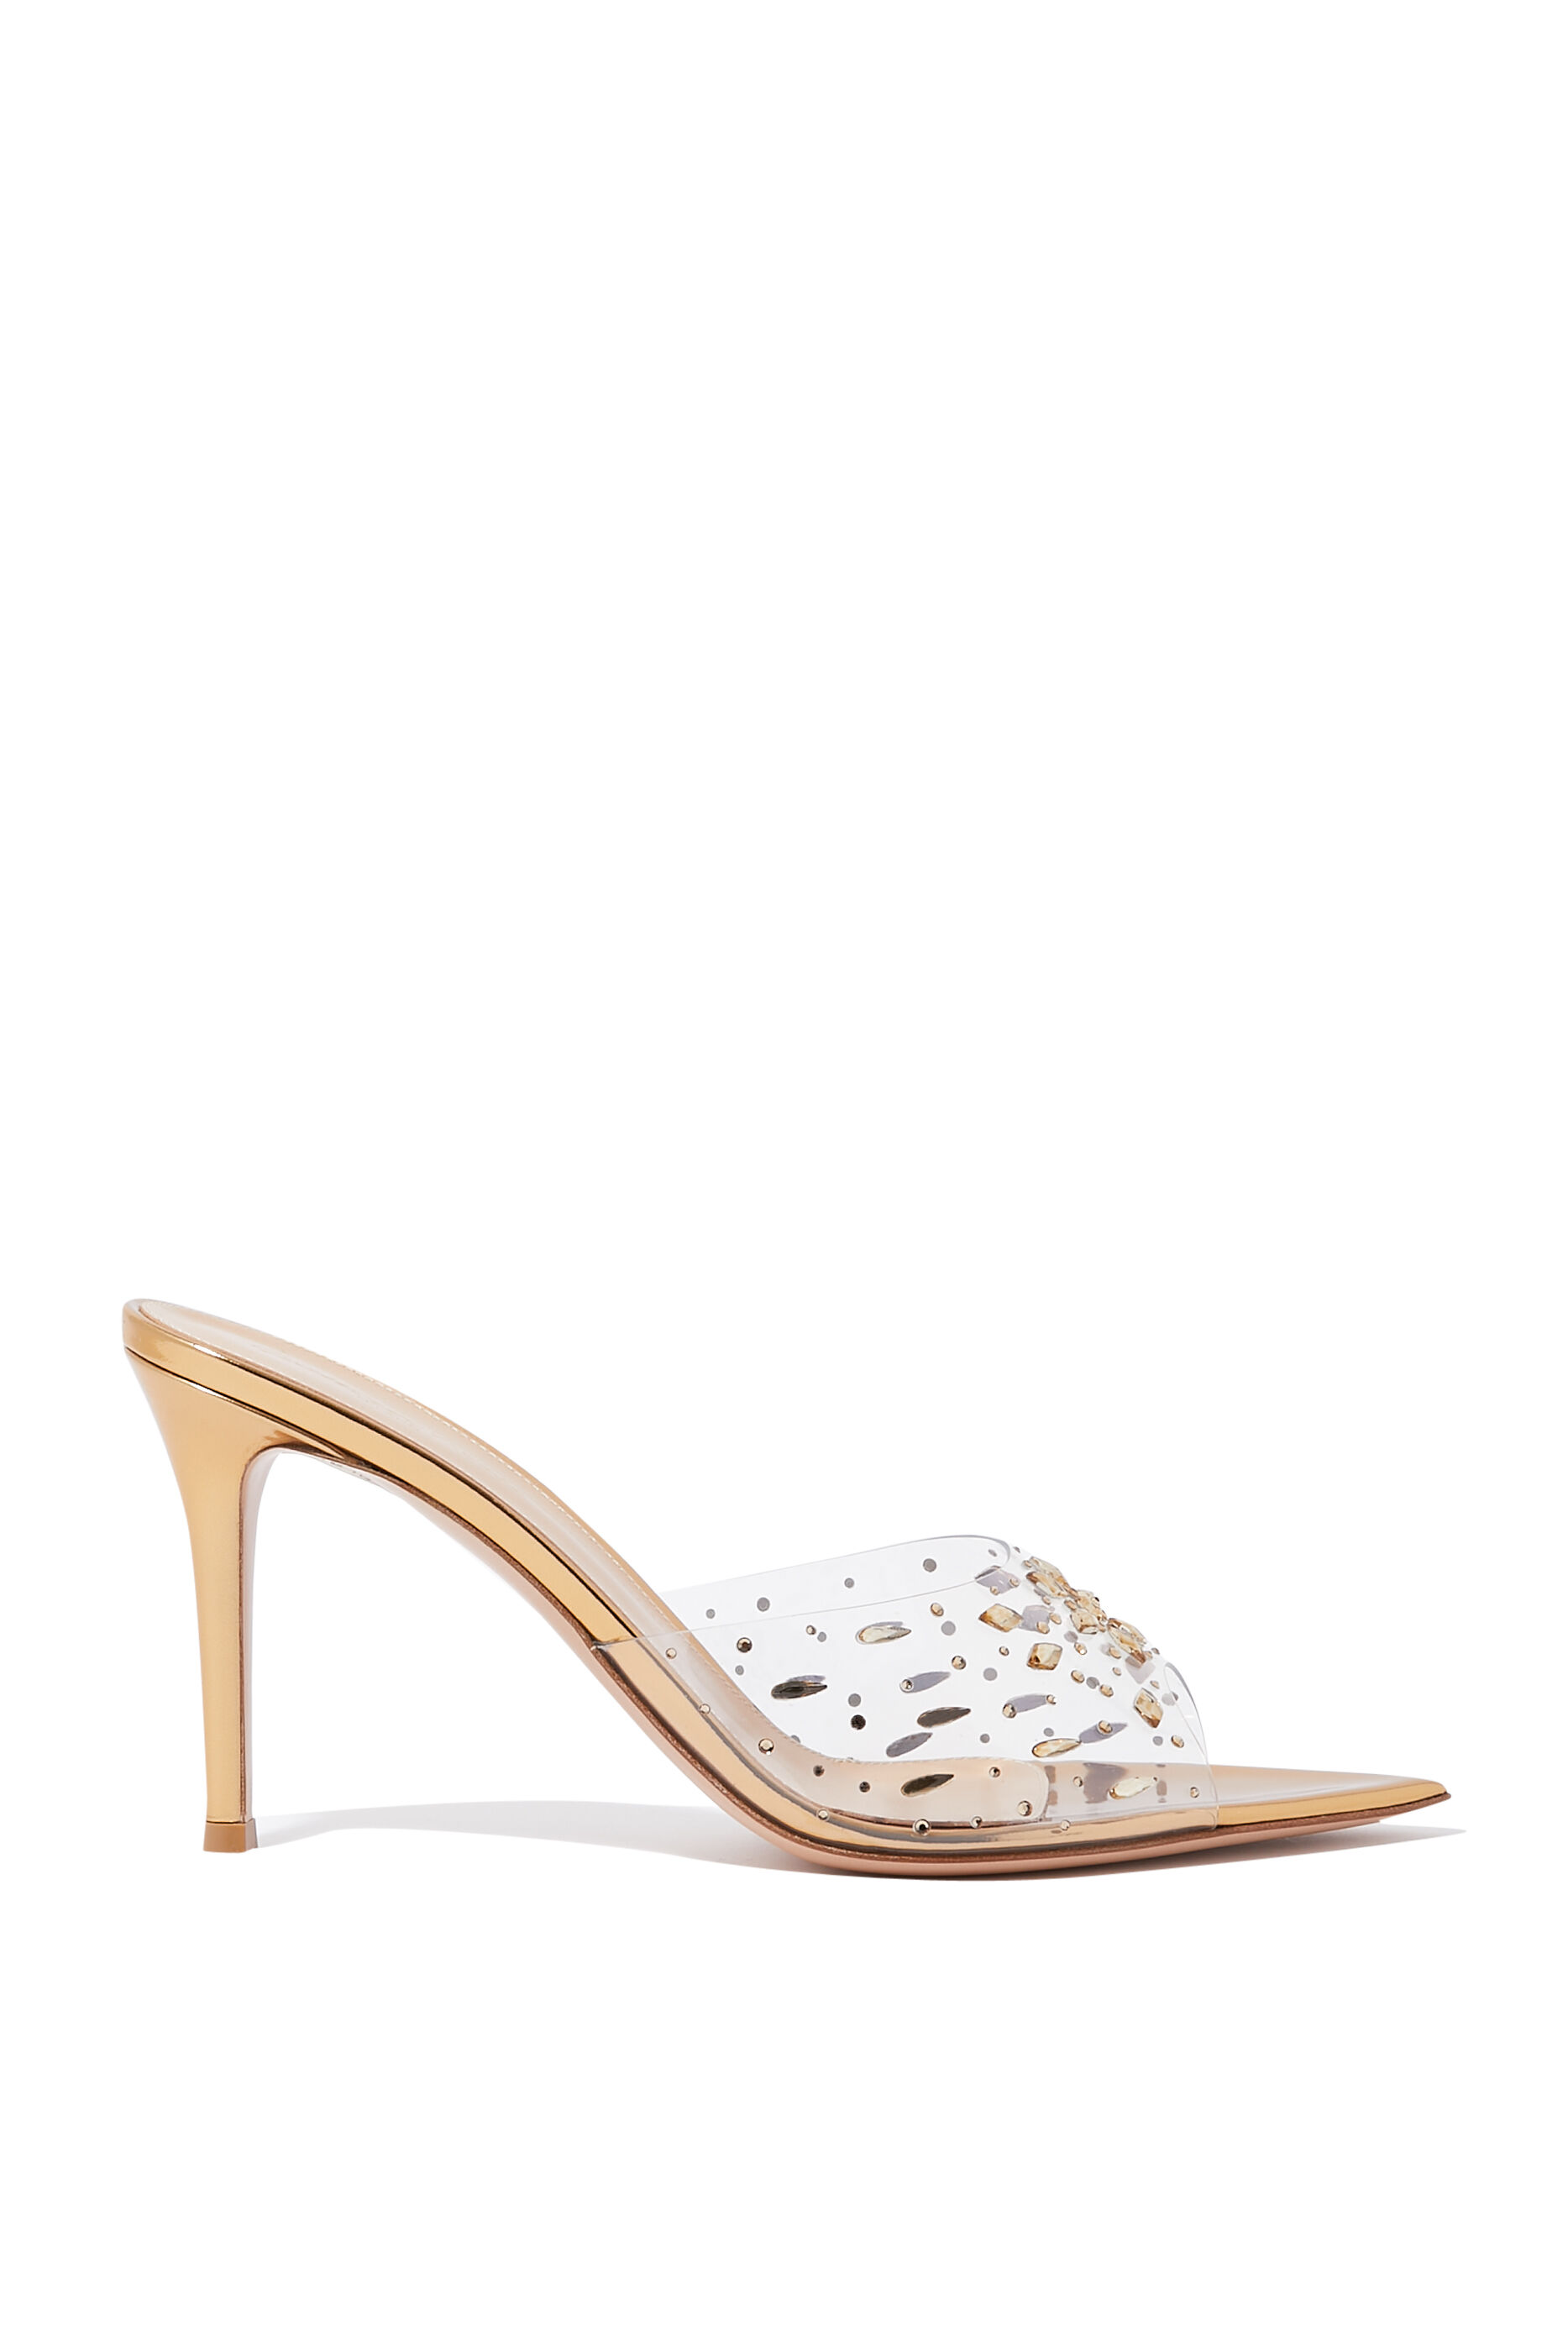 Buy Gianvito Rossi Exclusive Alley 85 Embellished Metallic Leather 